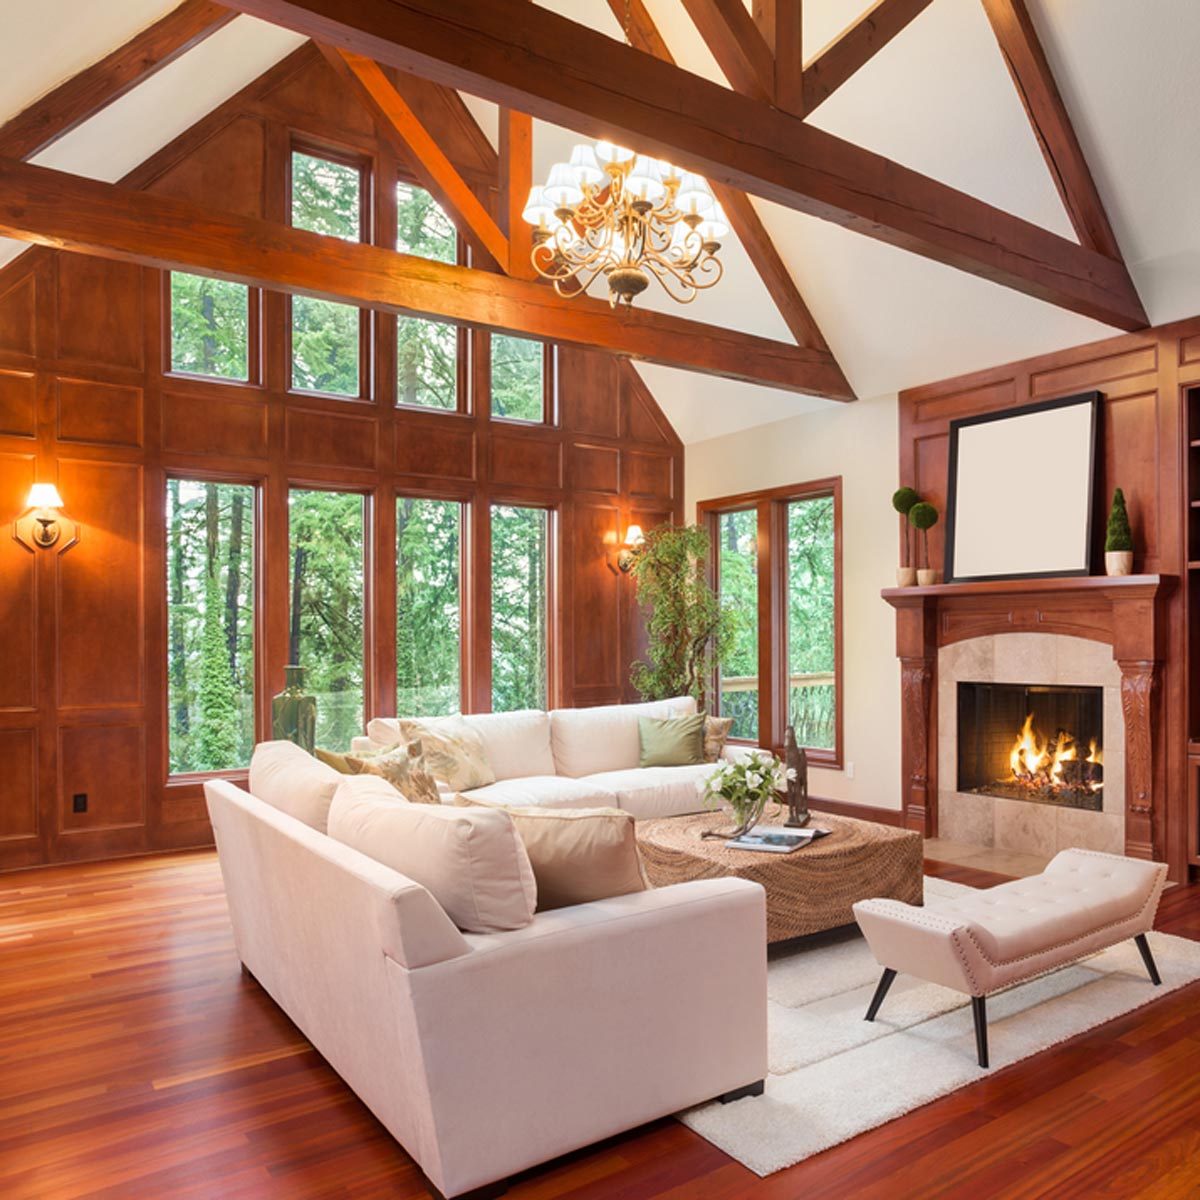 shutterstock_360087827 wood trim living room with vaulted ceiling